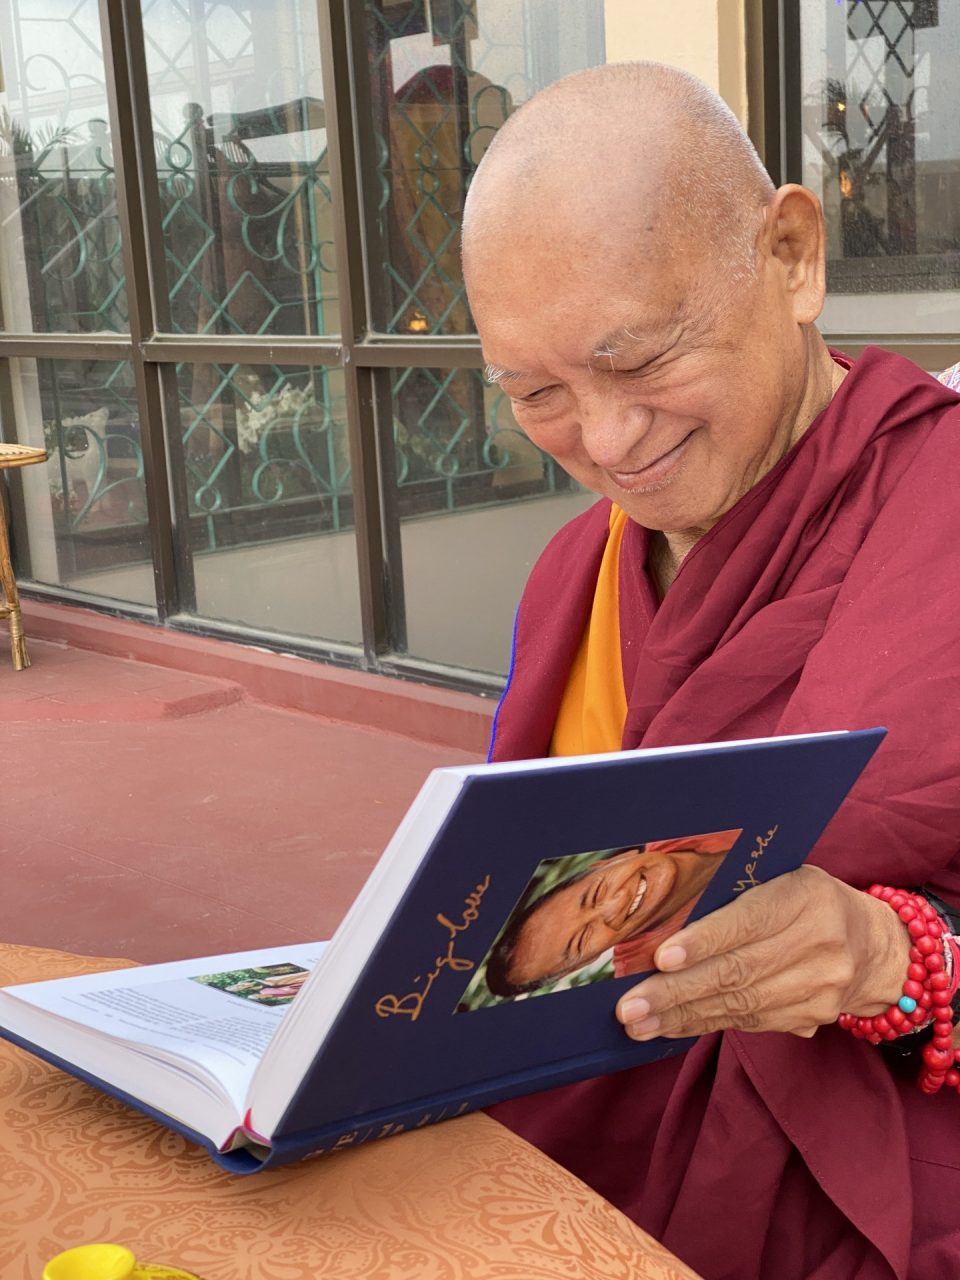 Welcome to the April FPMT e-News